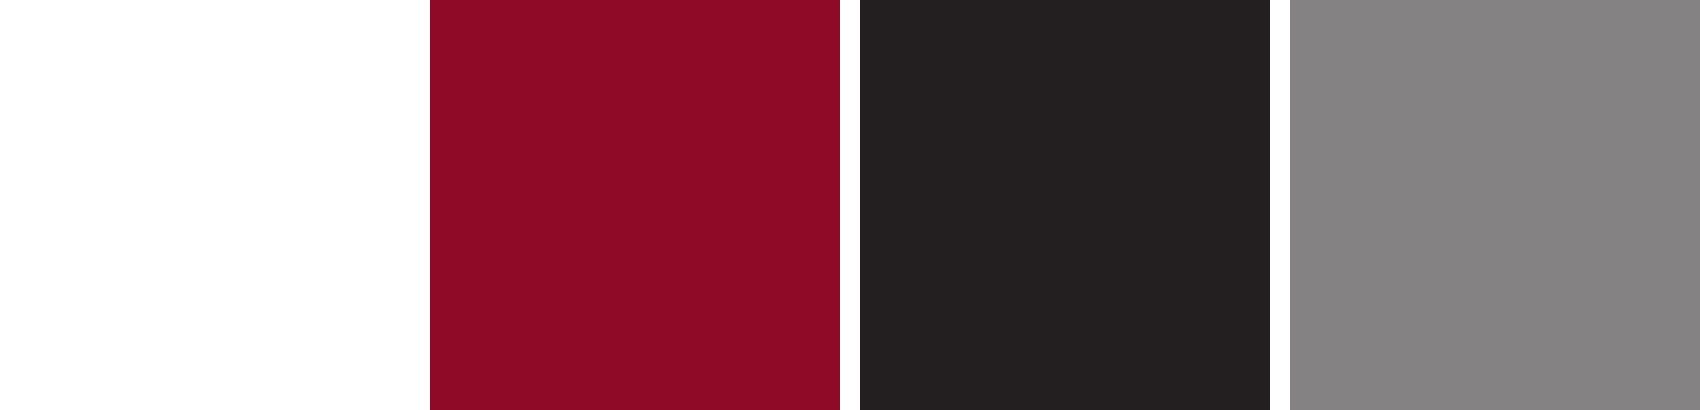 Ramapo College Roadrunners Color Palette Image